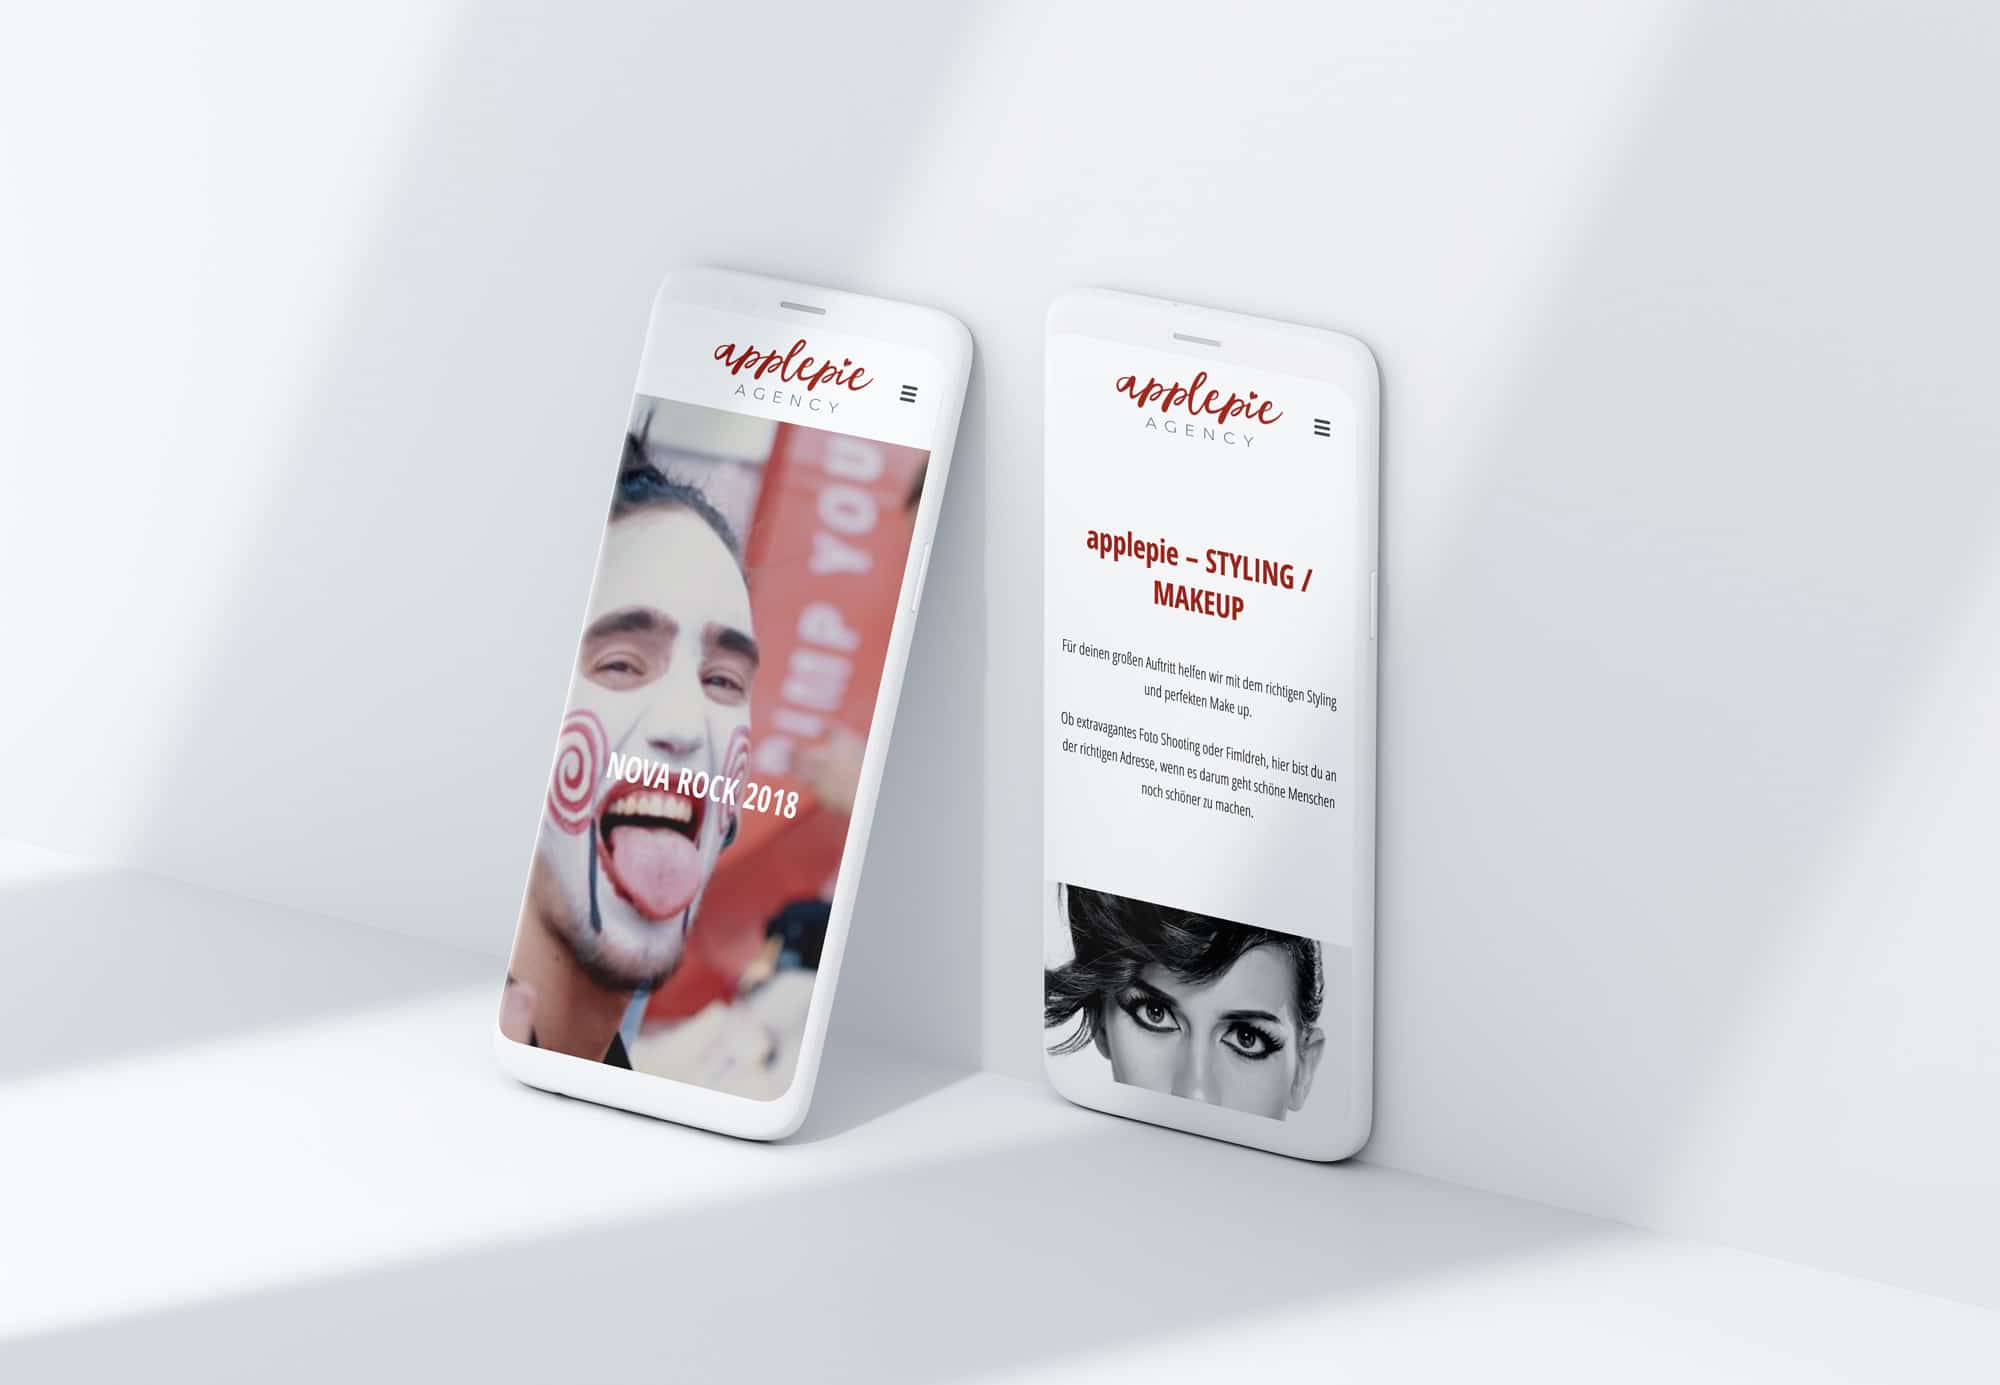 Wedesign-mobile-ready-by-PiKSEL-applepie-AGENCY